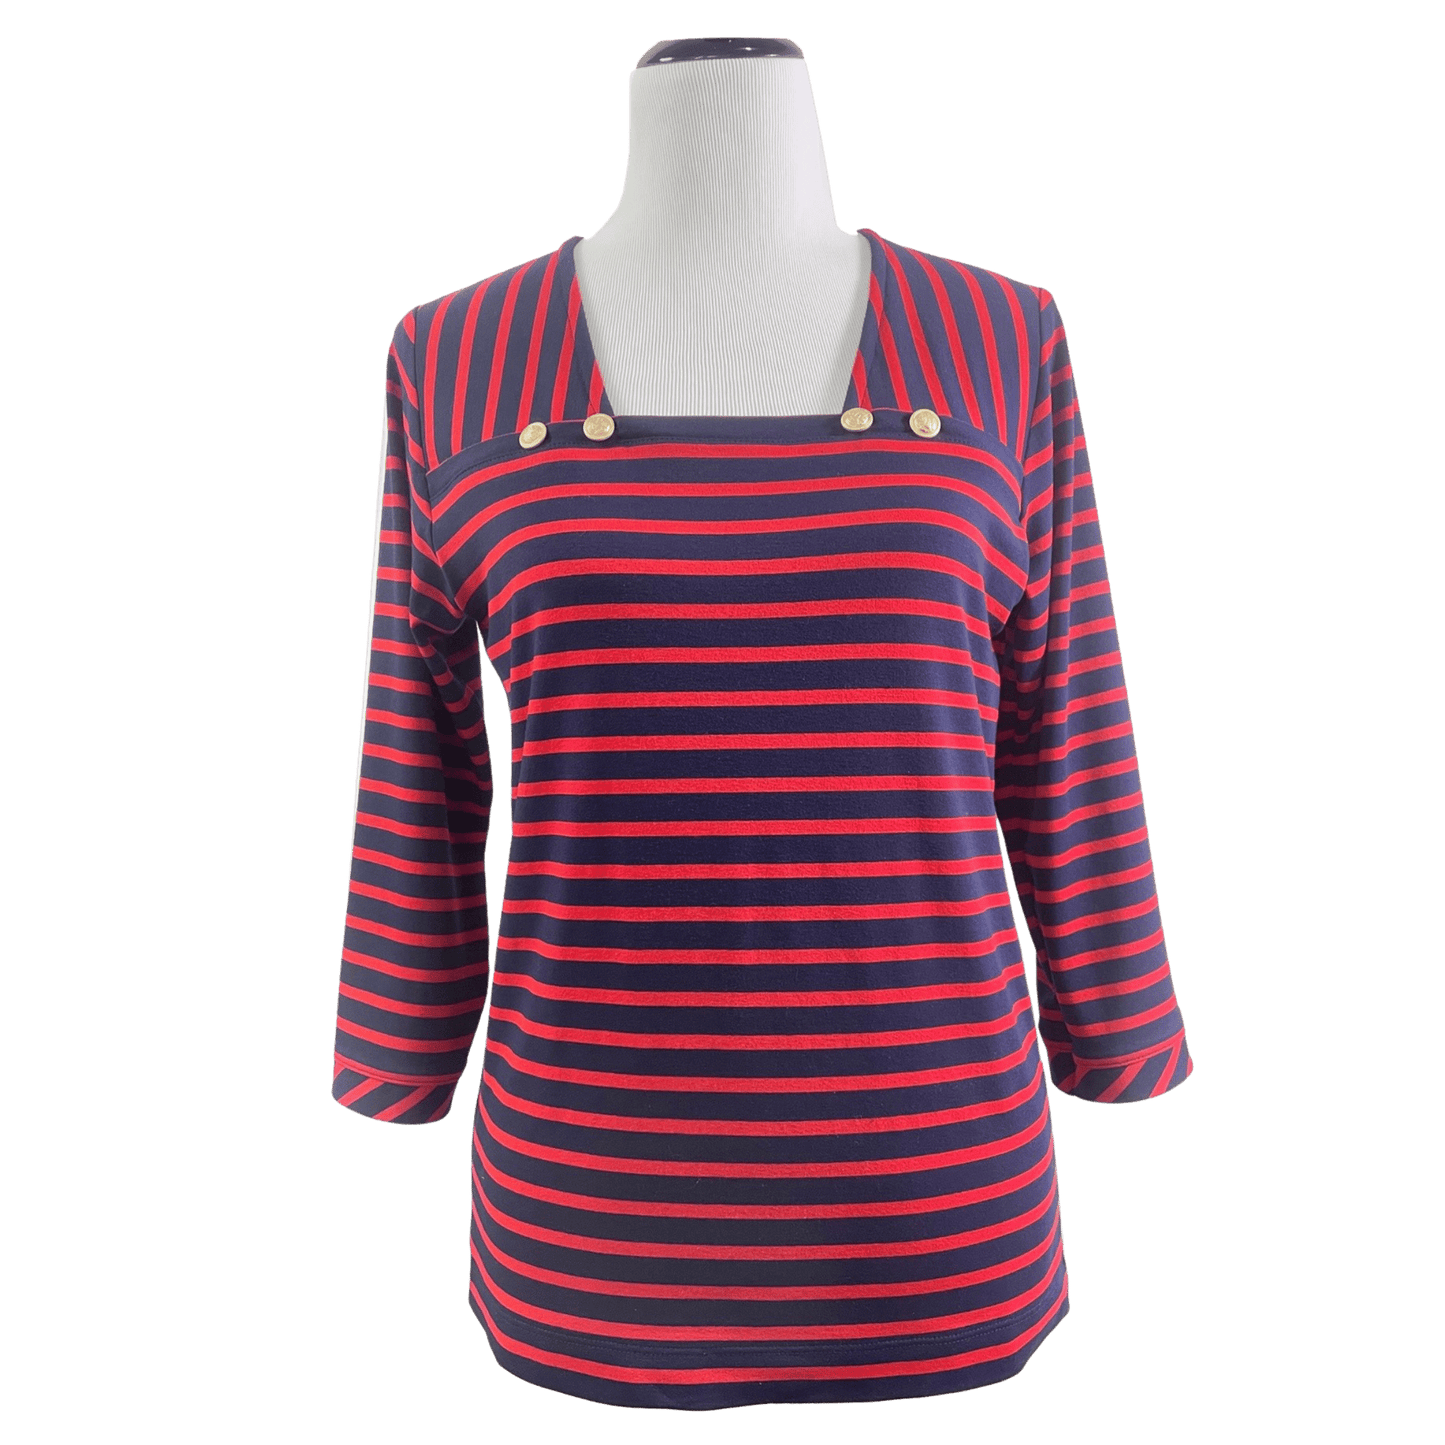 A navy and red striped shirt on a mannequin